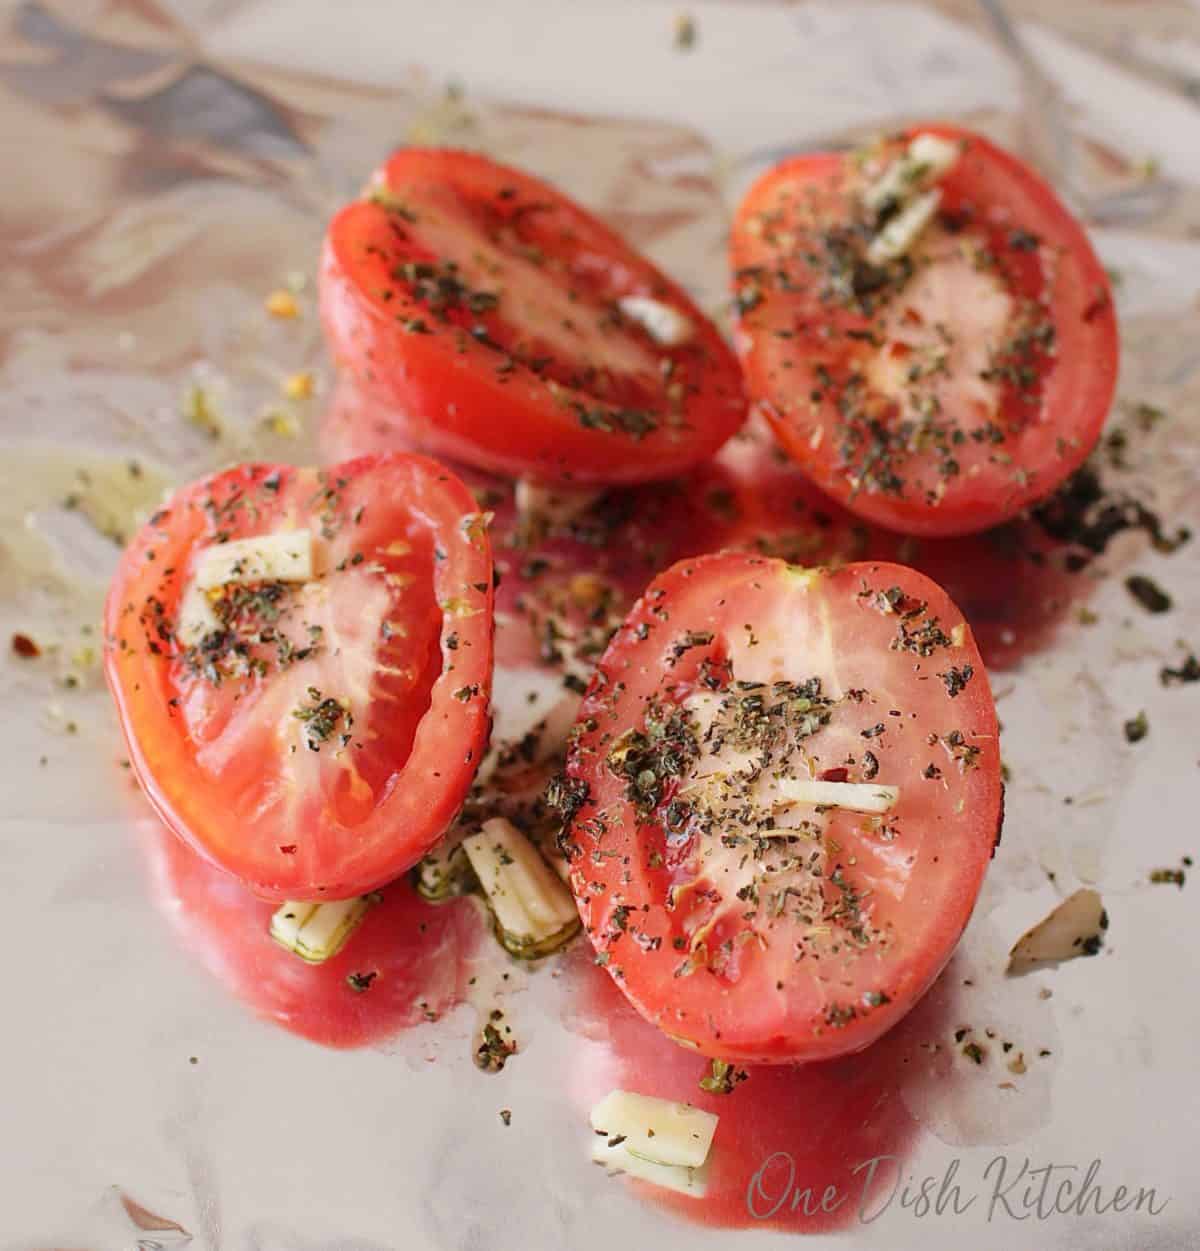 tomatoes sliced in half and place on aluminum foil and topped with seasoning and olive oil.